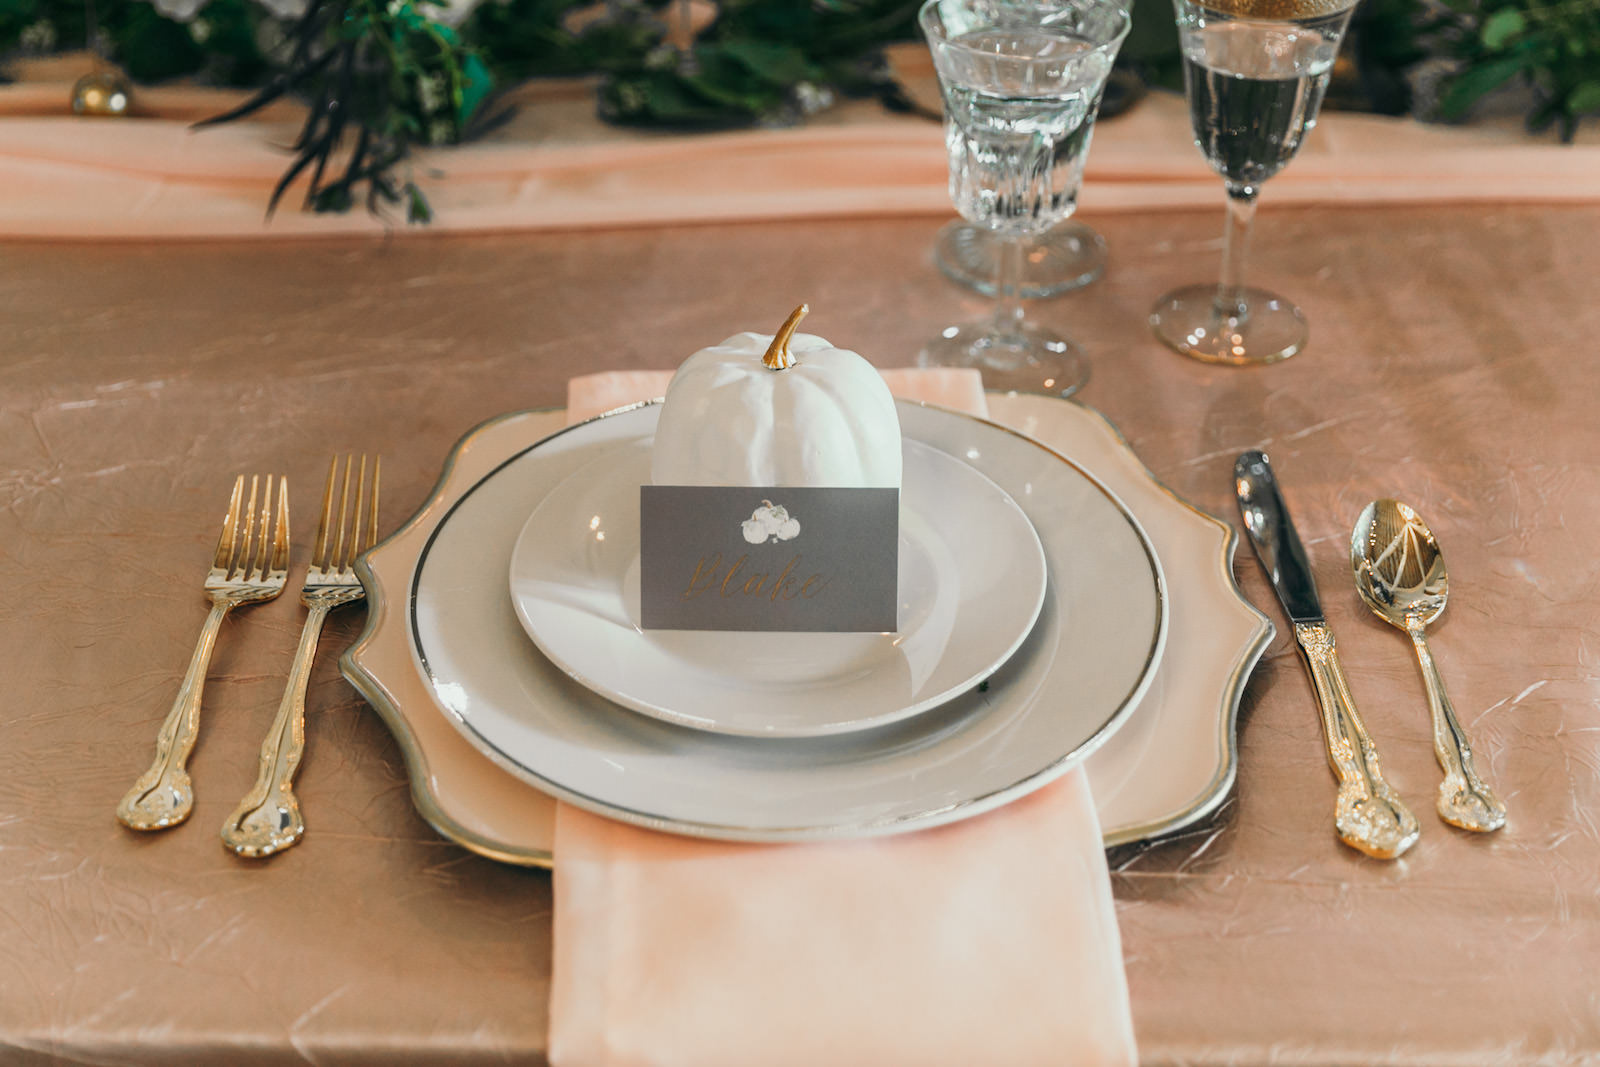 Place Setting with Pale Pink and White Charge and Gold Flatware | White Pumpkin Décor with Place Card